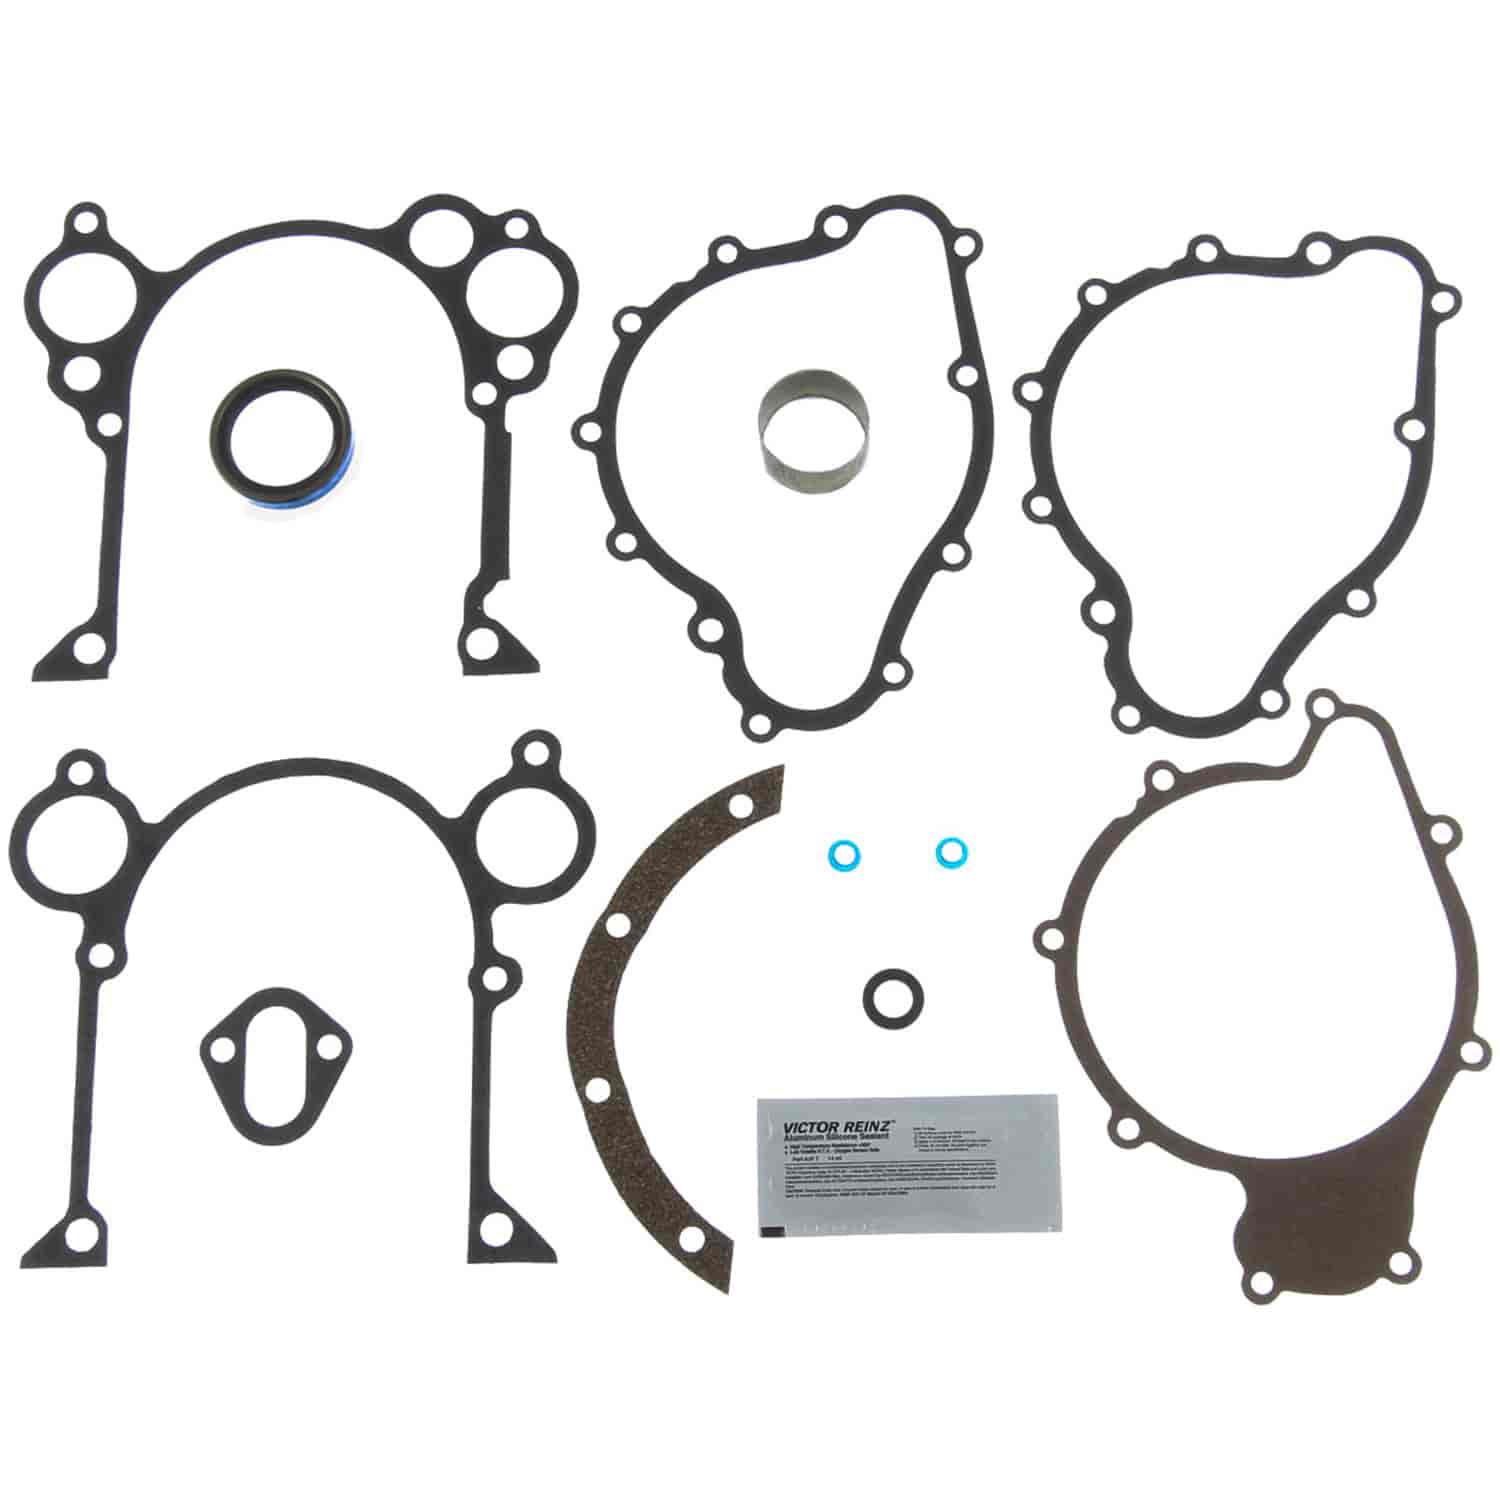 Timing Cover Set Bui Pont 301 326 350 400 421 428 455 63-81  Contains Repair Sleeve Option T